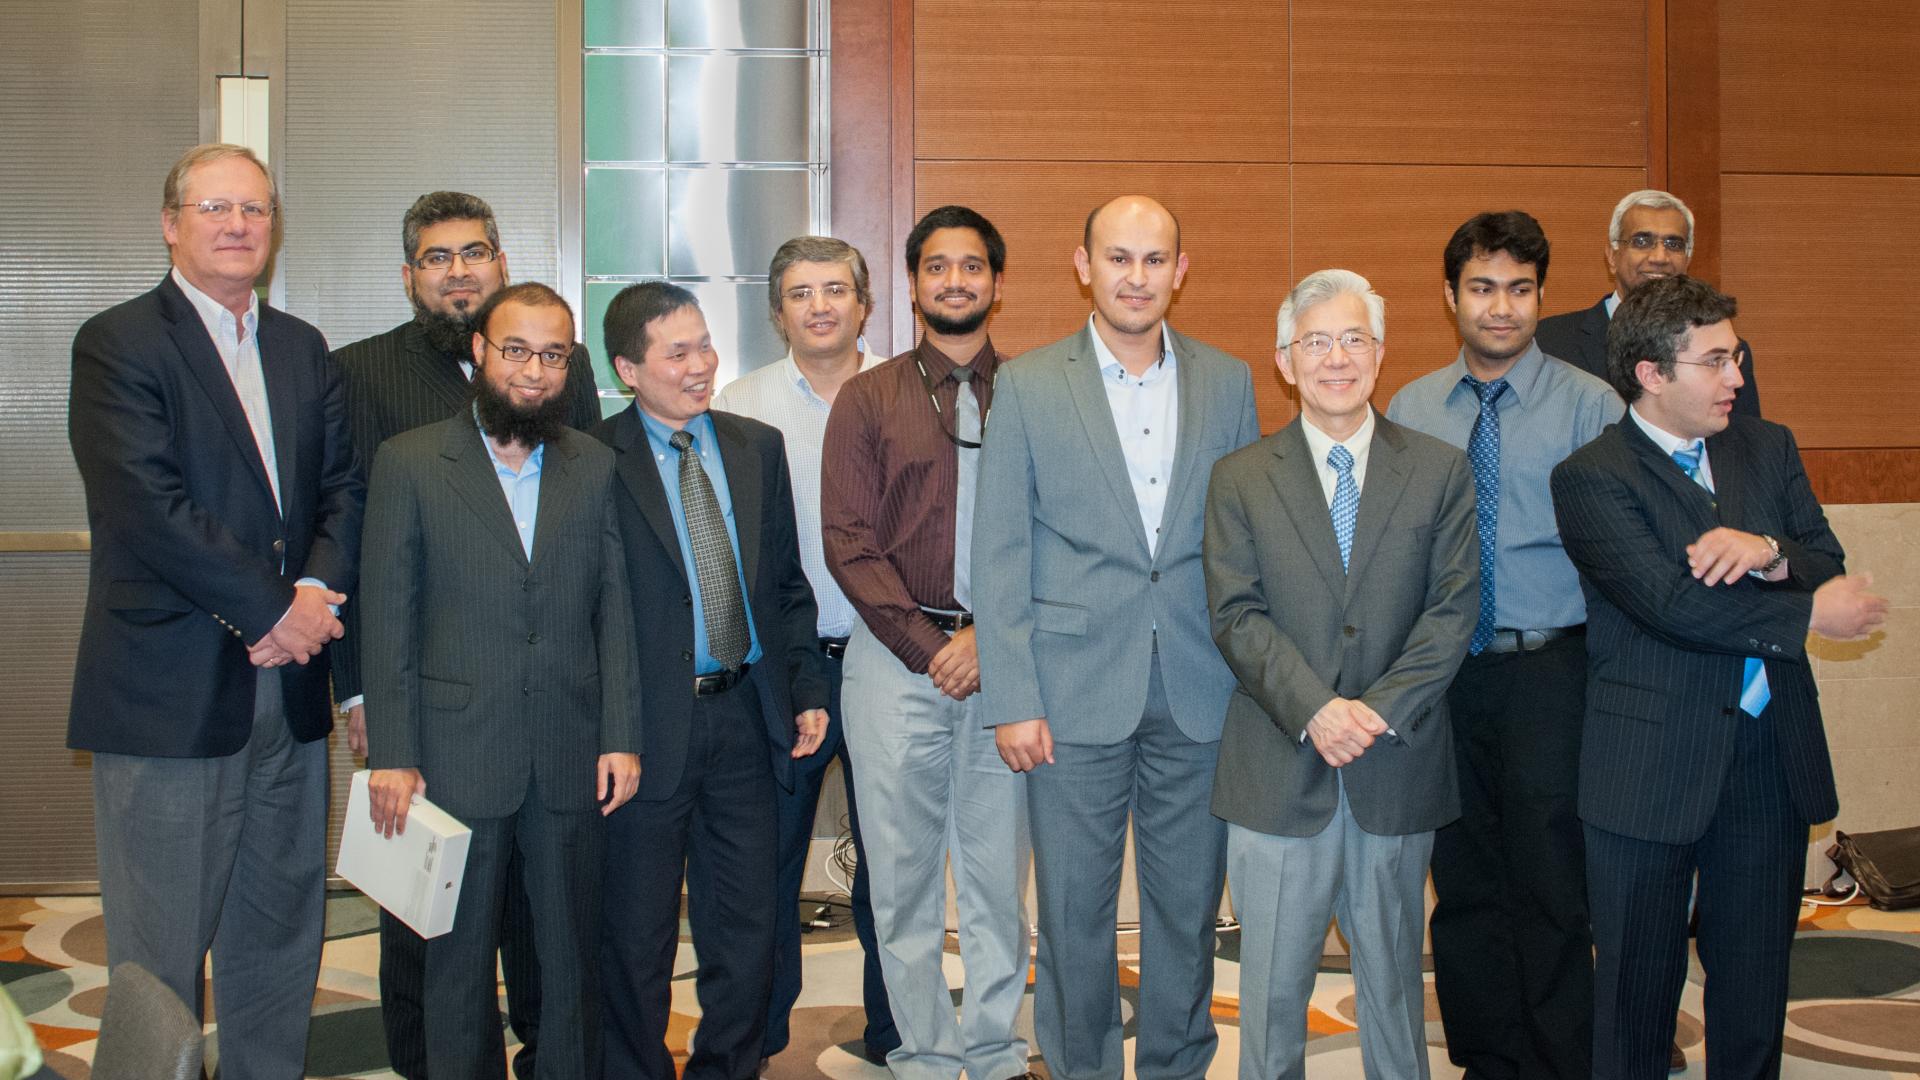 Mahdi Ben Ghorbel And The Prize Winners In EE Days With Some EE Faculty And The President